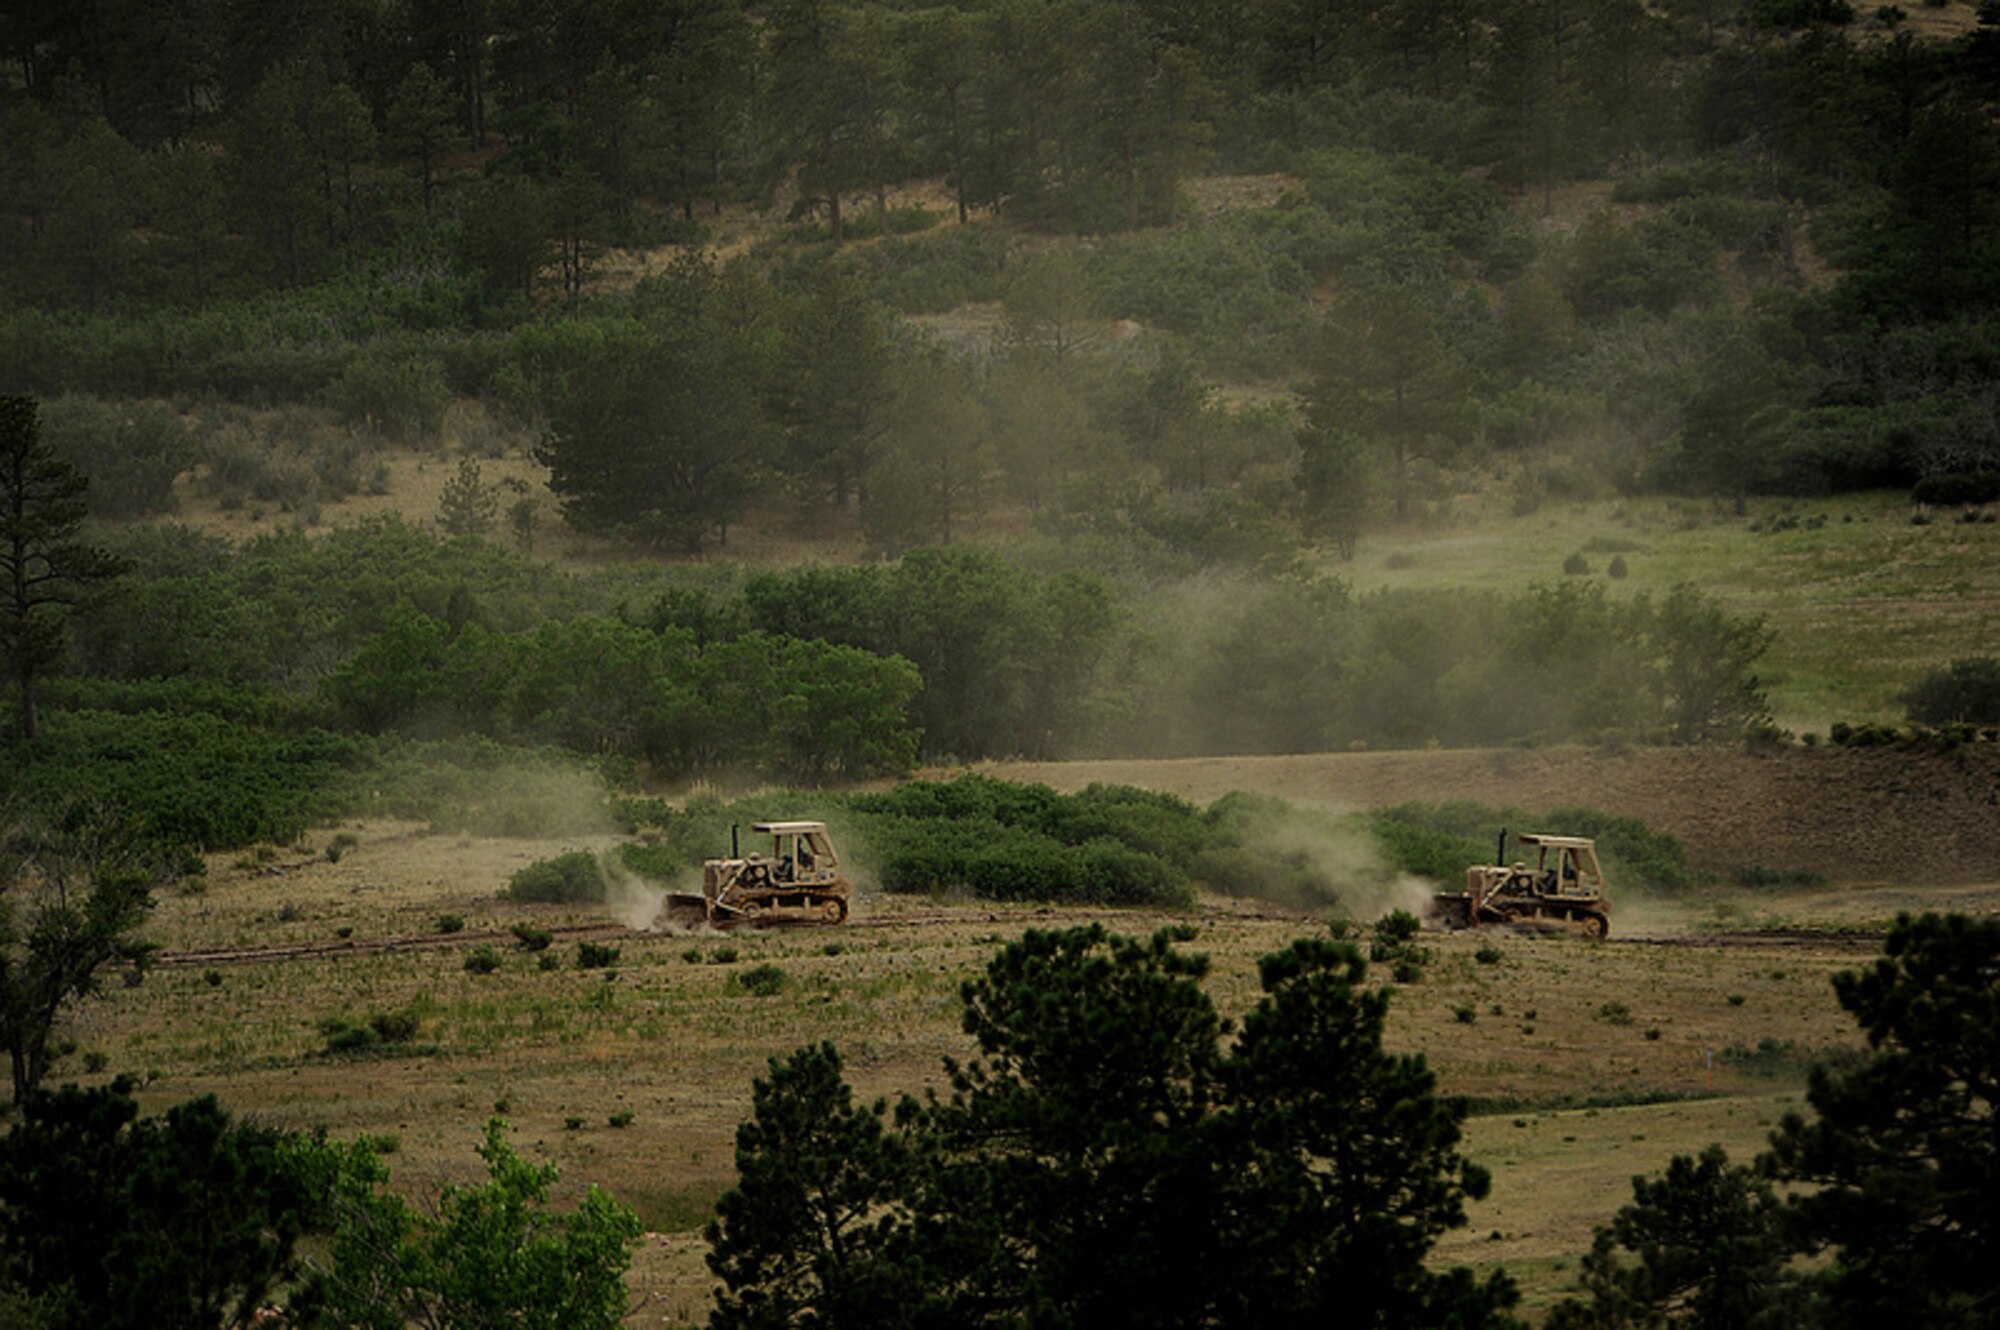 Bulldozers from Fort Carson, Colo., cut a fire line at the U.S. Air Force Academy as firefighters continue to battle several fires that burned into the evening hours in Waldo Canyon on June 27, 2012. The fires, which have burned more than 15,000 acres, began spreading to the southwestern corner of the Academy causing base officials to evacuate residents. Officials estimated the fire had spread to about 10 acres of Academy land. (U.S. Air Force photo/Master Sgt. Jeremy Lock)